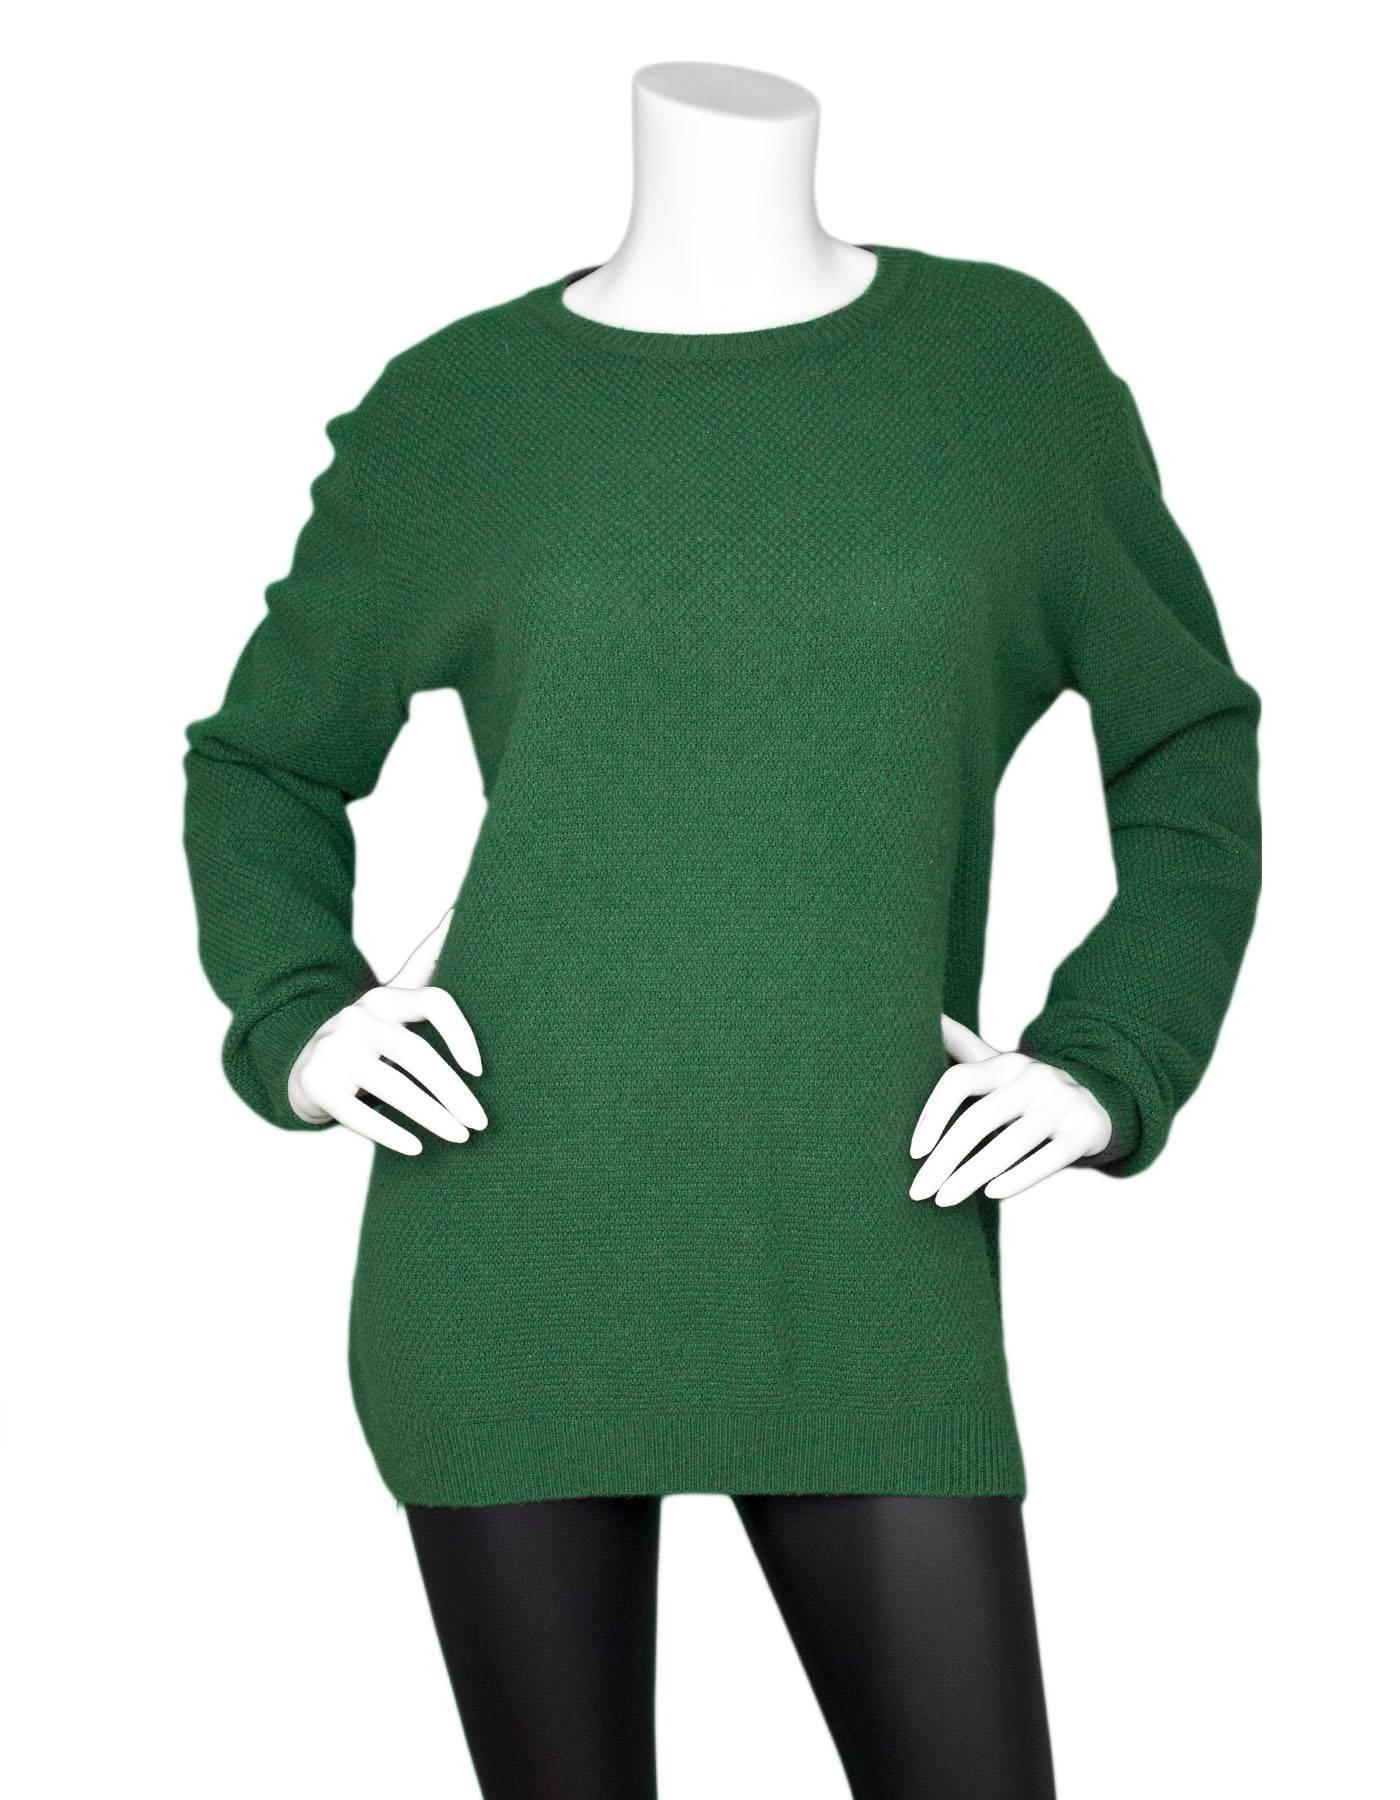 Marni Green Cashmere with Zipper Detail Sz IT48

Features waffle knit and oversized fit

Made In: Italy
Color: Green
Composition: 100% Cashmere
Closure/Opening: Pull over
Retail Price: $660 + tax
Overall Condition: Excellent pre-owned condition,